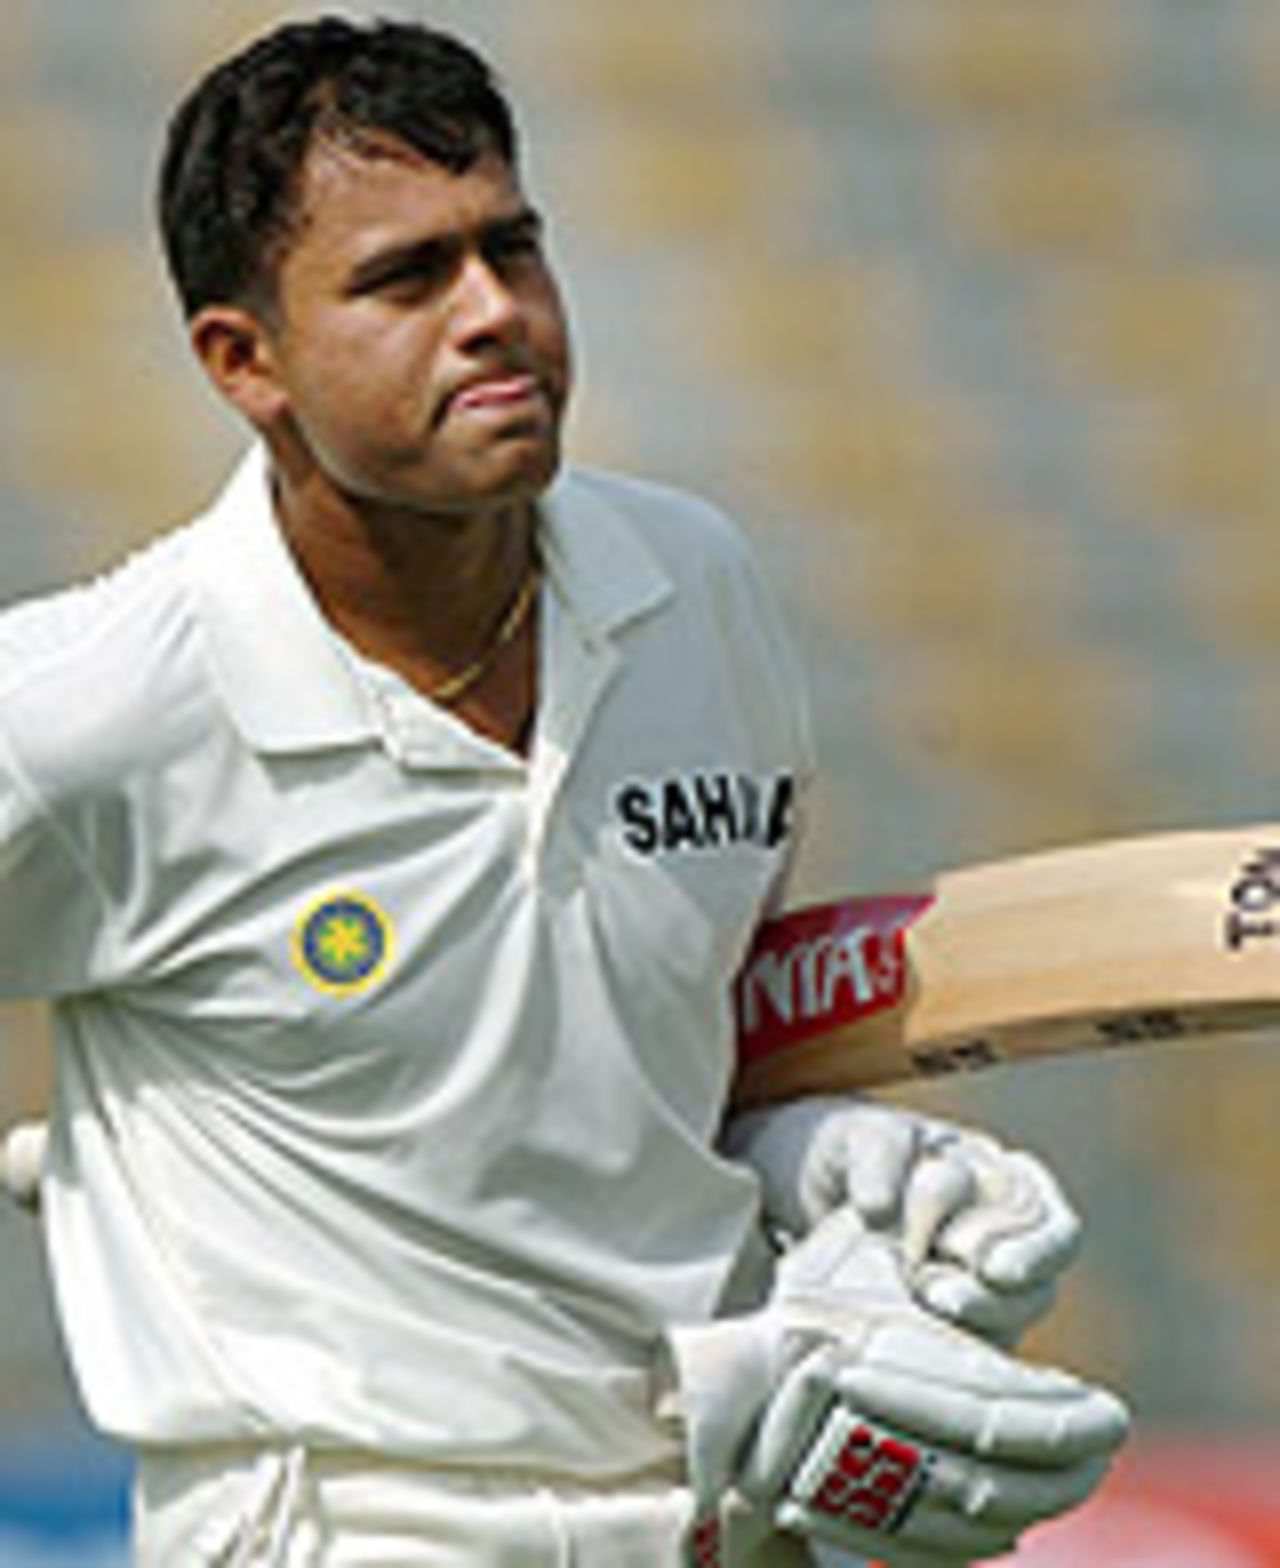 Aakash Chopra walks back after an unlucky dismissal, Pakistan v India, 2nd Test, Lahore, 3rd day, April 7, 2004